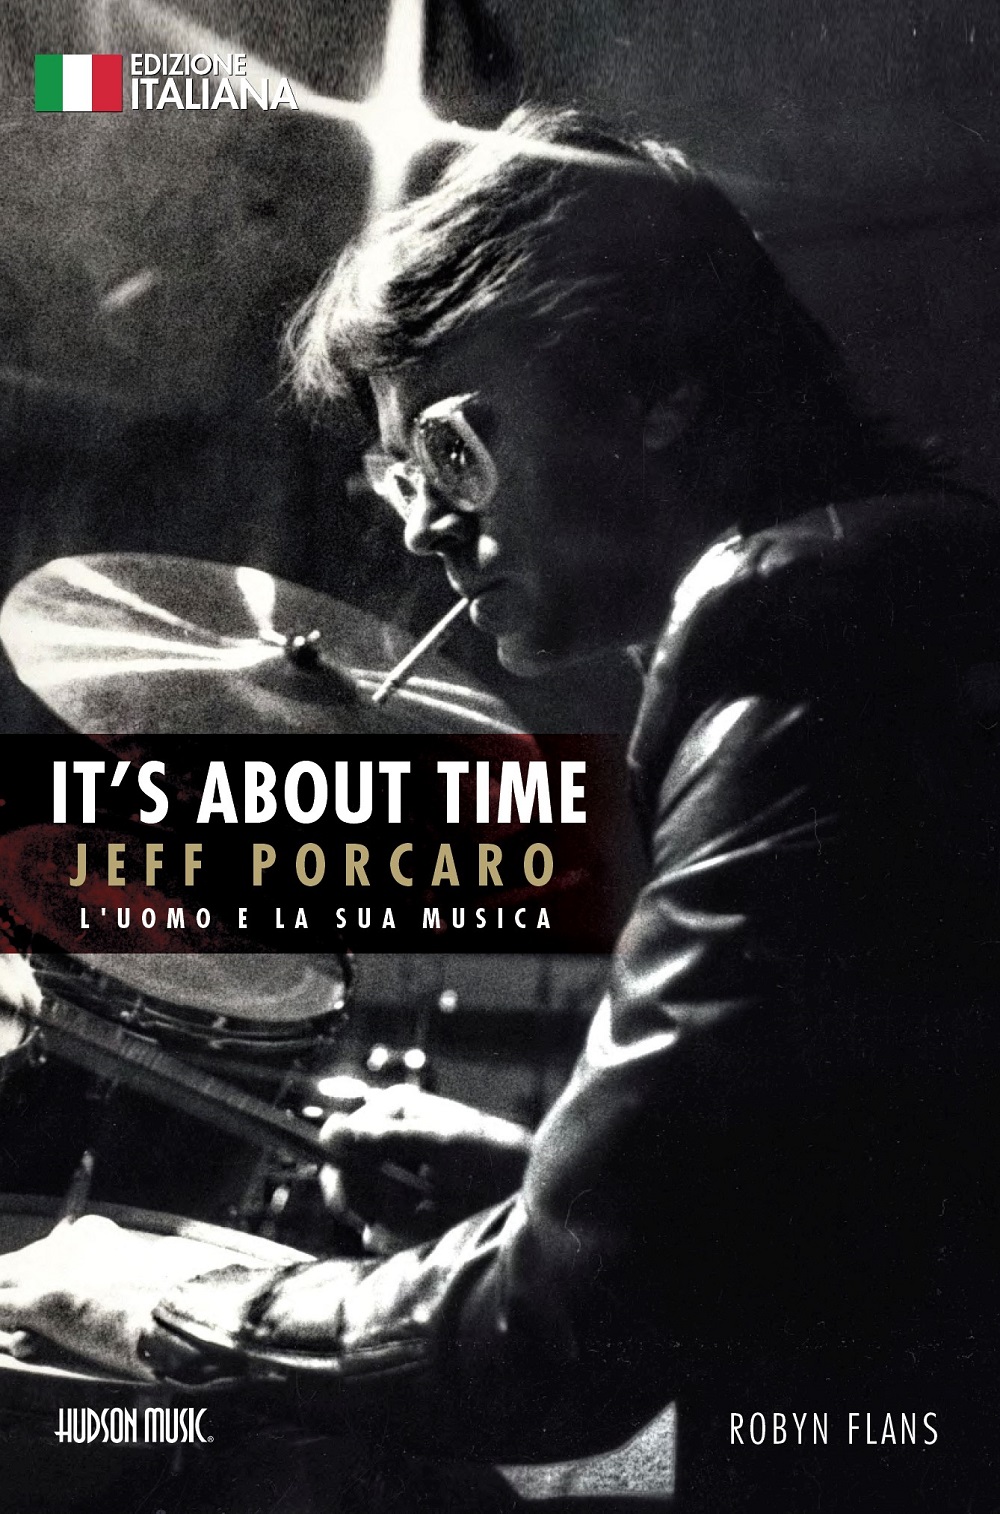 Robyn Flans: It's About Time Jeff Porcaro - Italian Edition: Biography